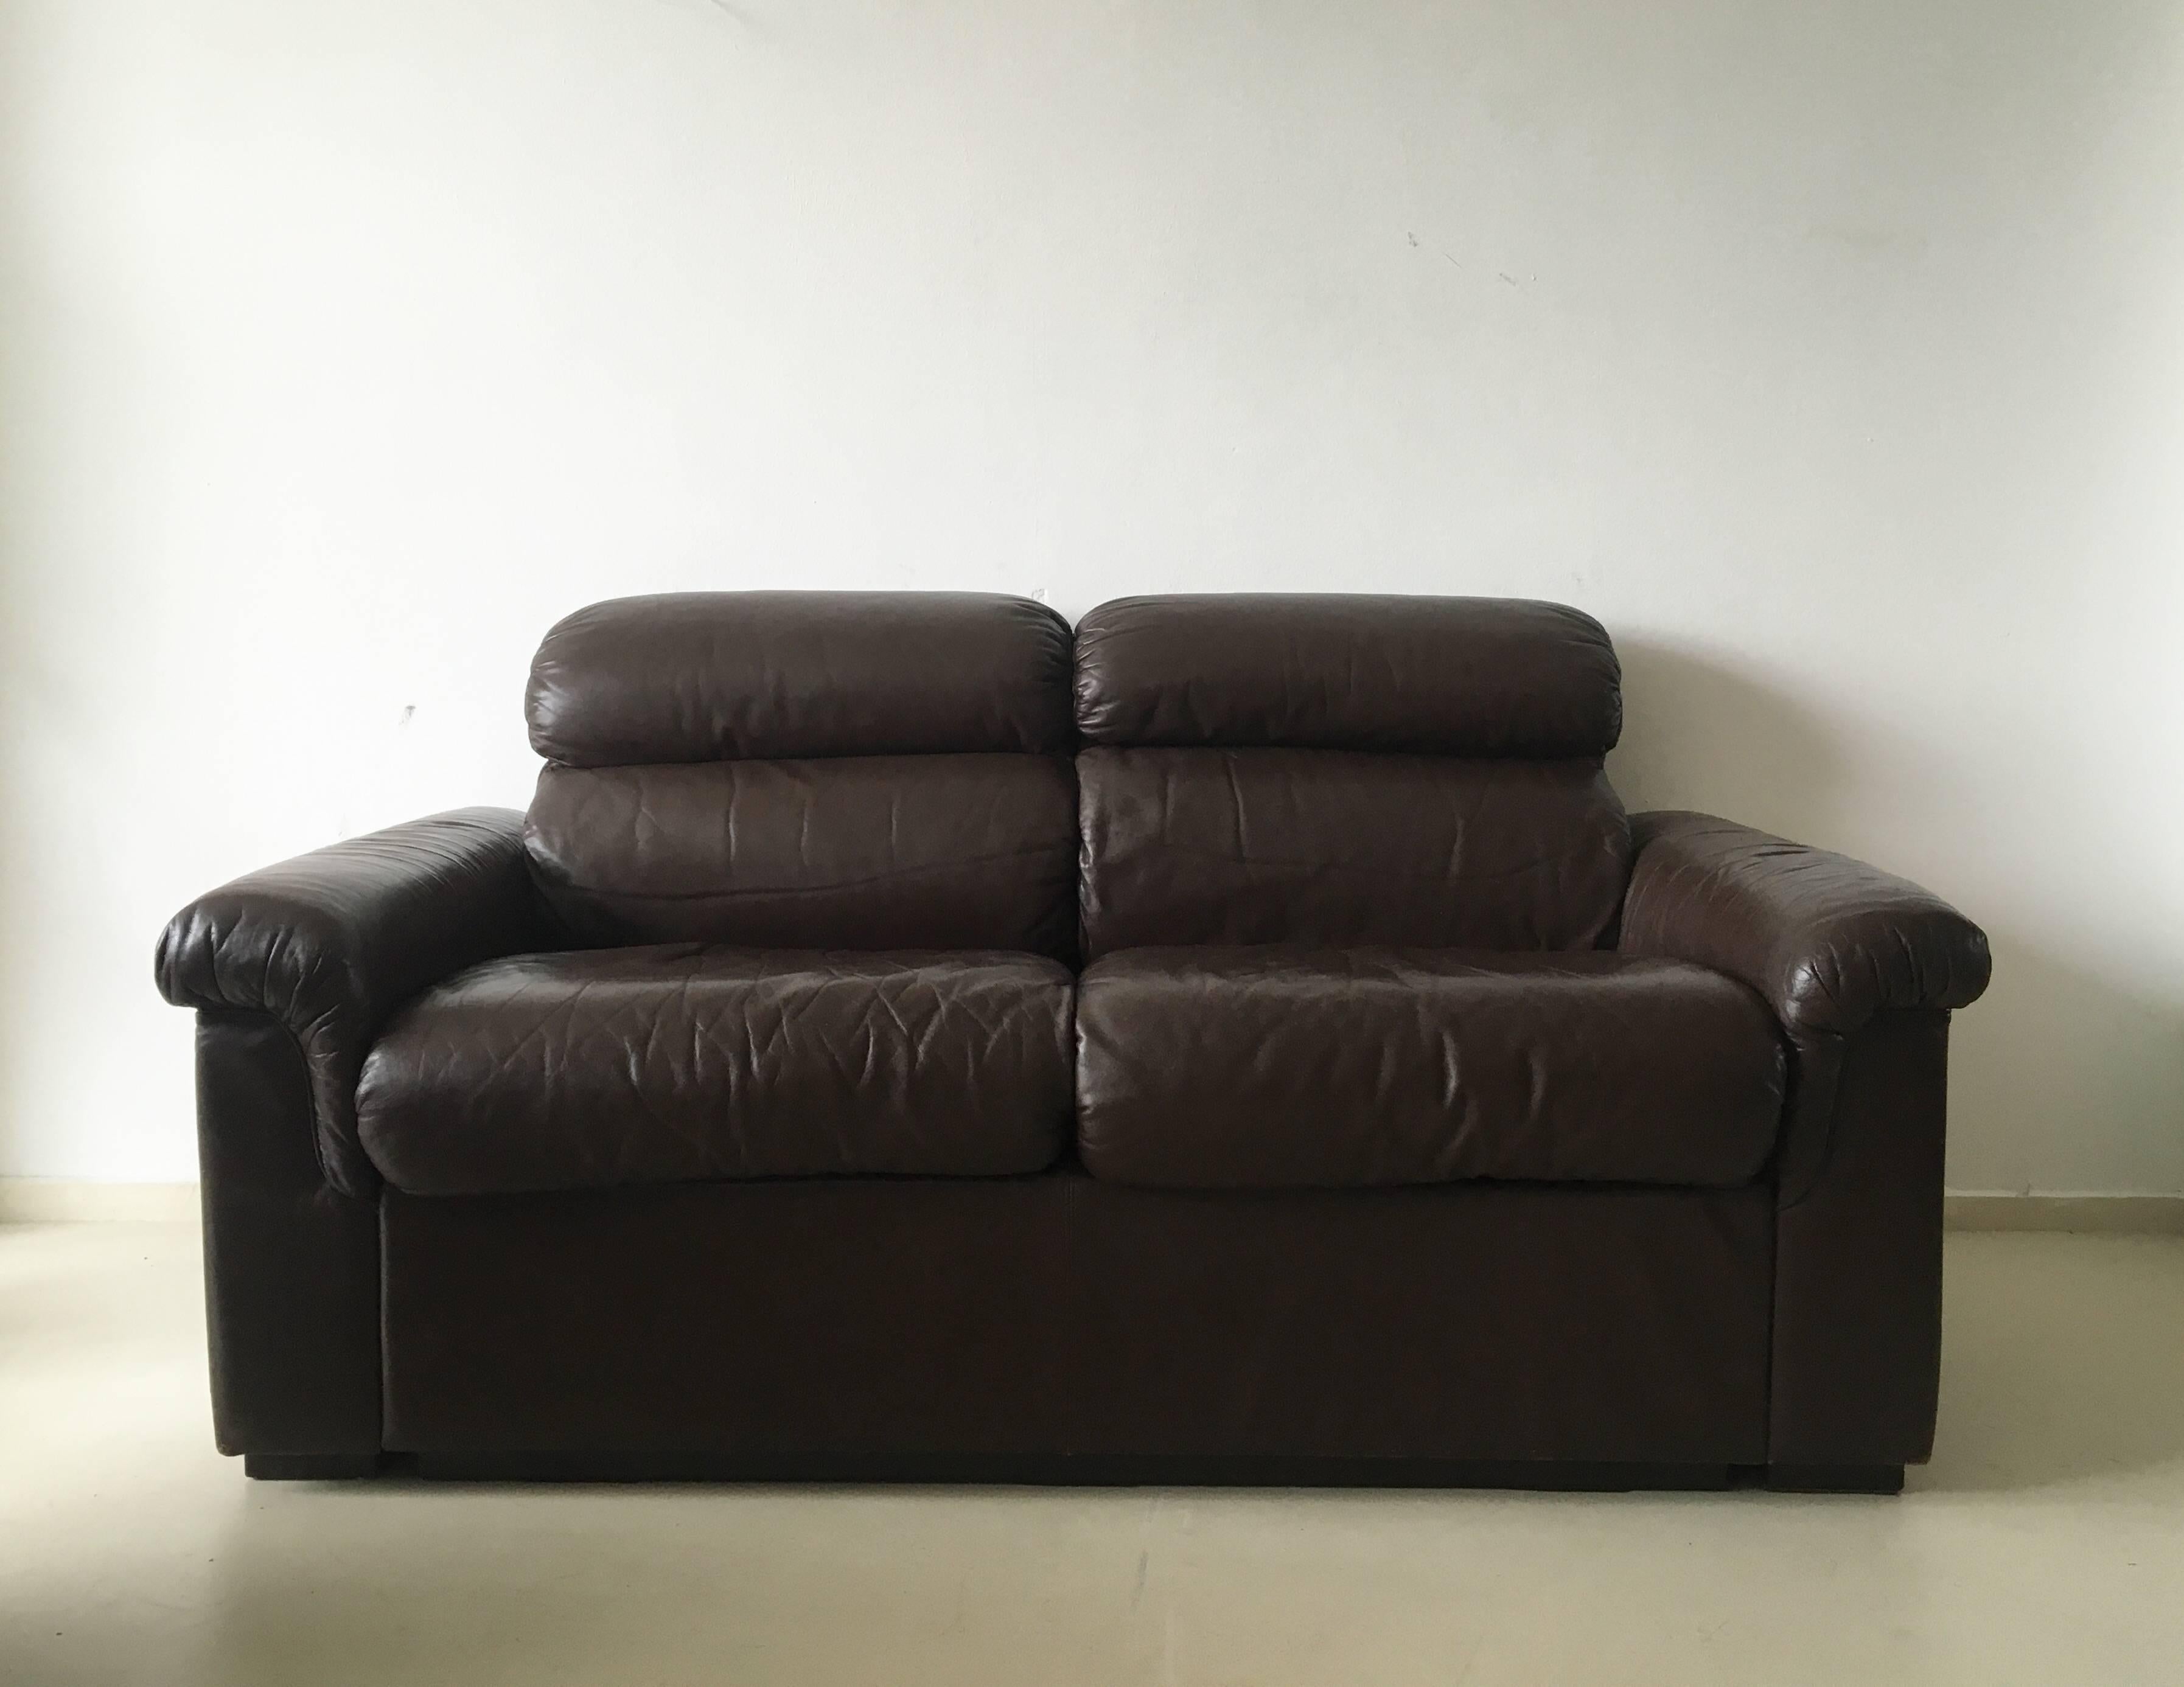 This couch was designed by OY BJ Dahlqvist and manufactured by BD furniture in Finland, circa the 1960s. It was made from soft brown leather and has a frame made out of wood. This two seat couch is in a very good condition with small signs of age